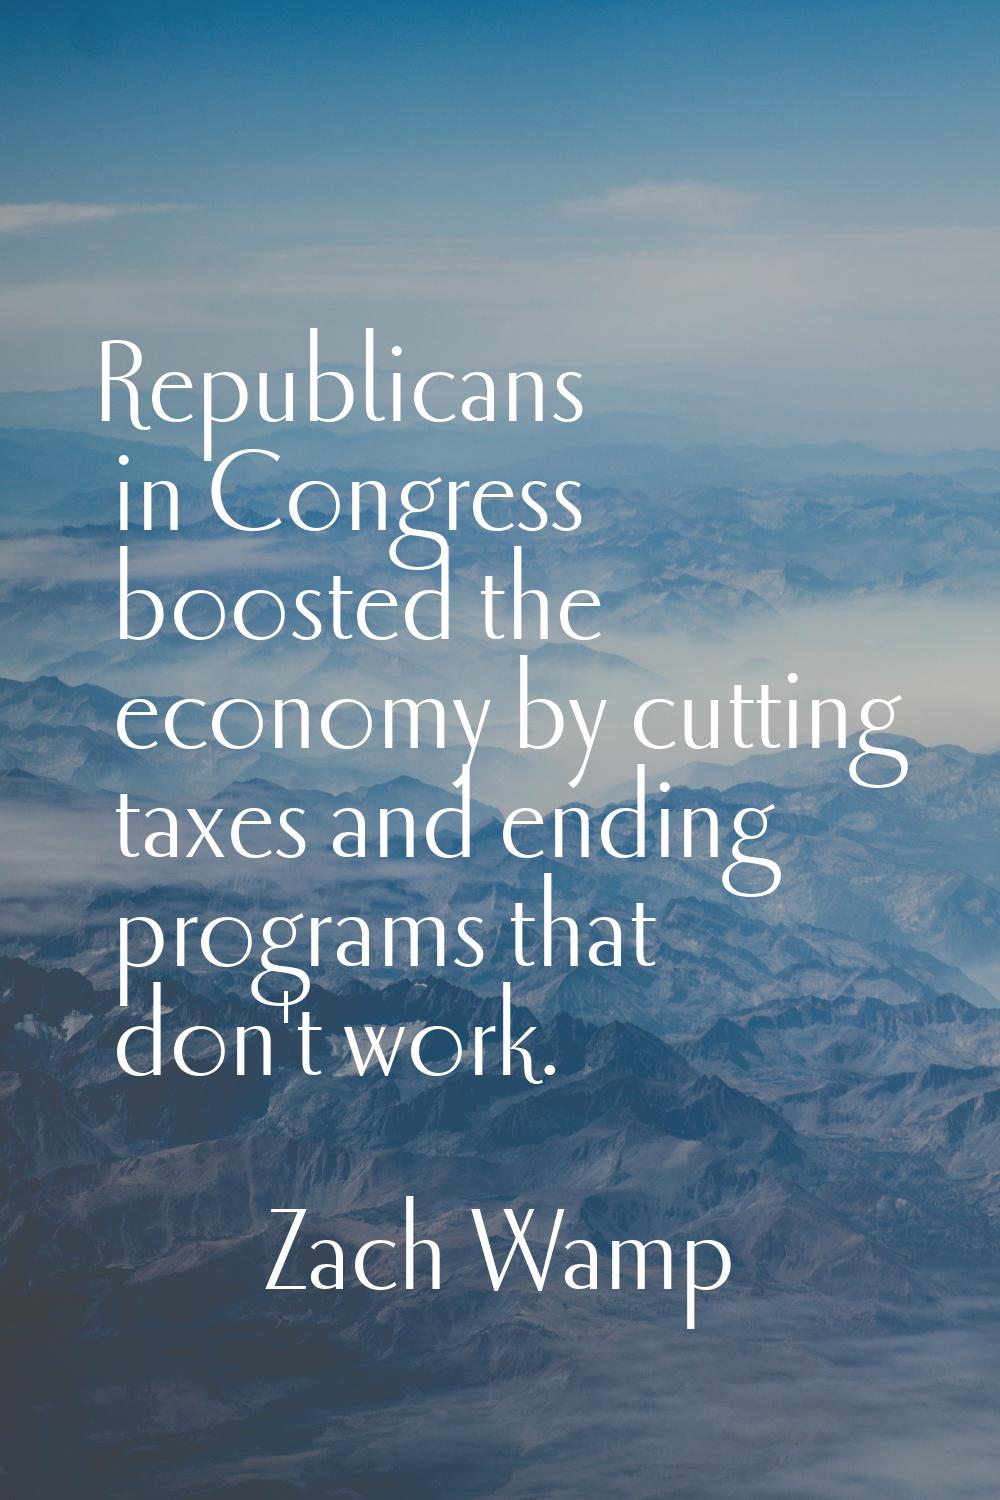 Republicans in Congress boosted the economy by cutting taxes and ending programs that don't work.